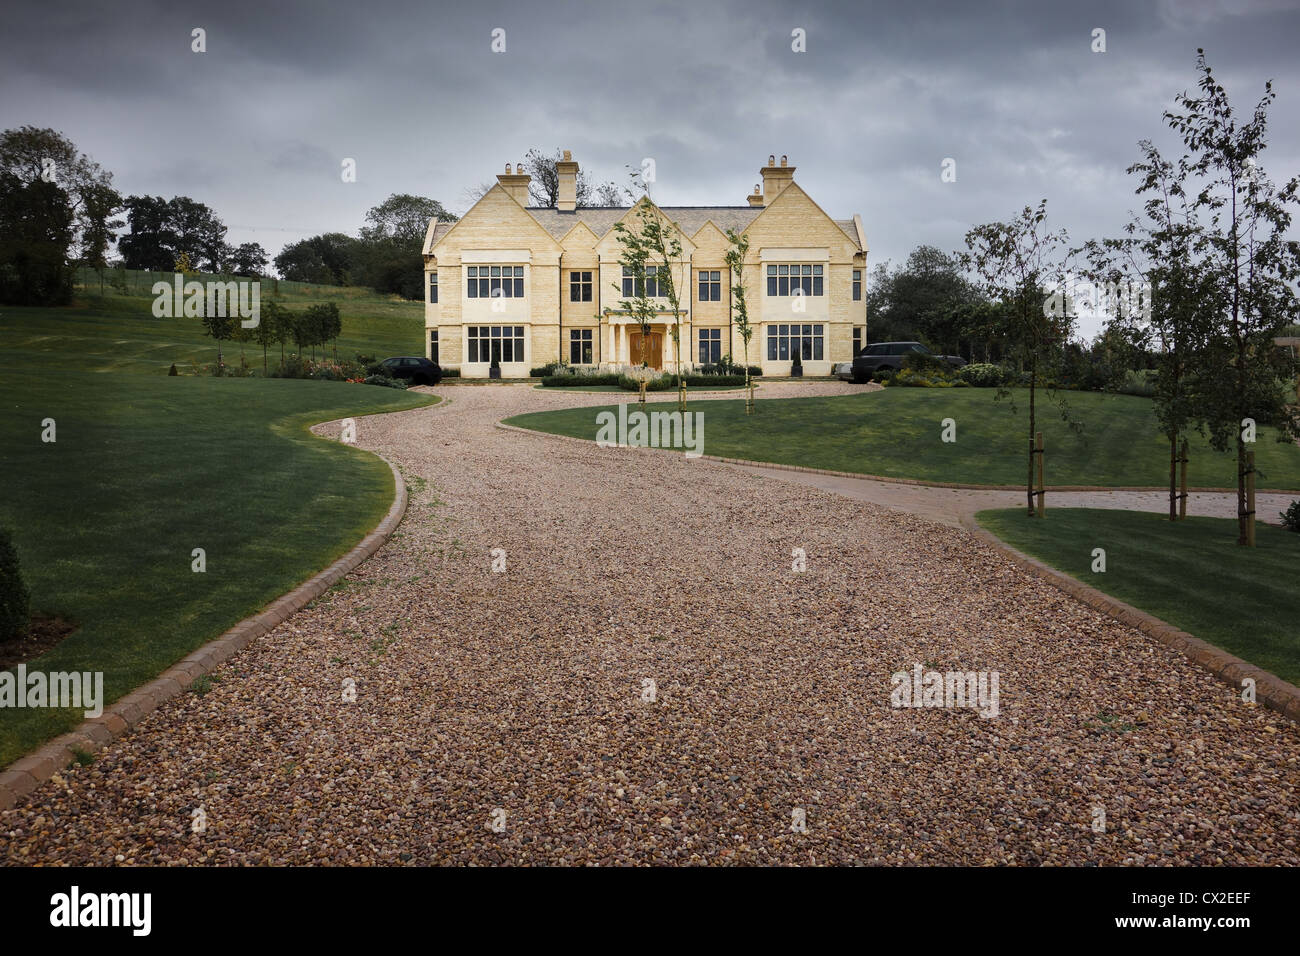 Pebble driveway to a modern stone country home in large grounds. Stock Photo